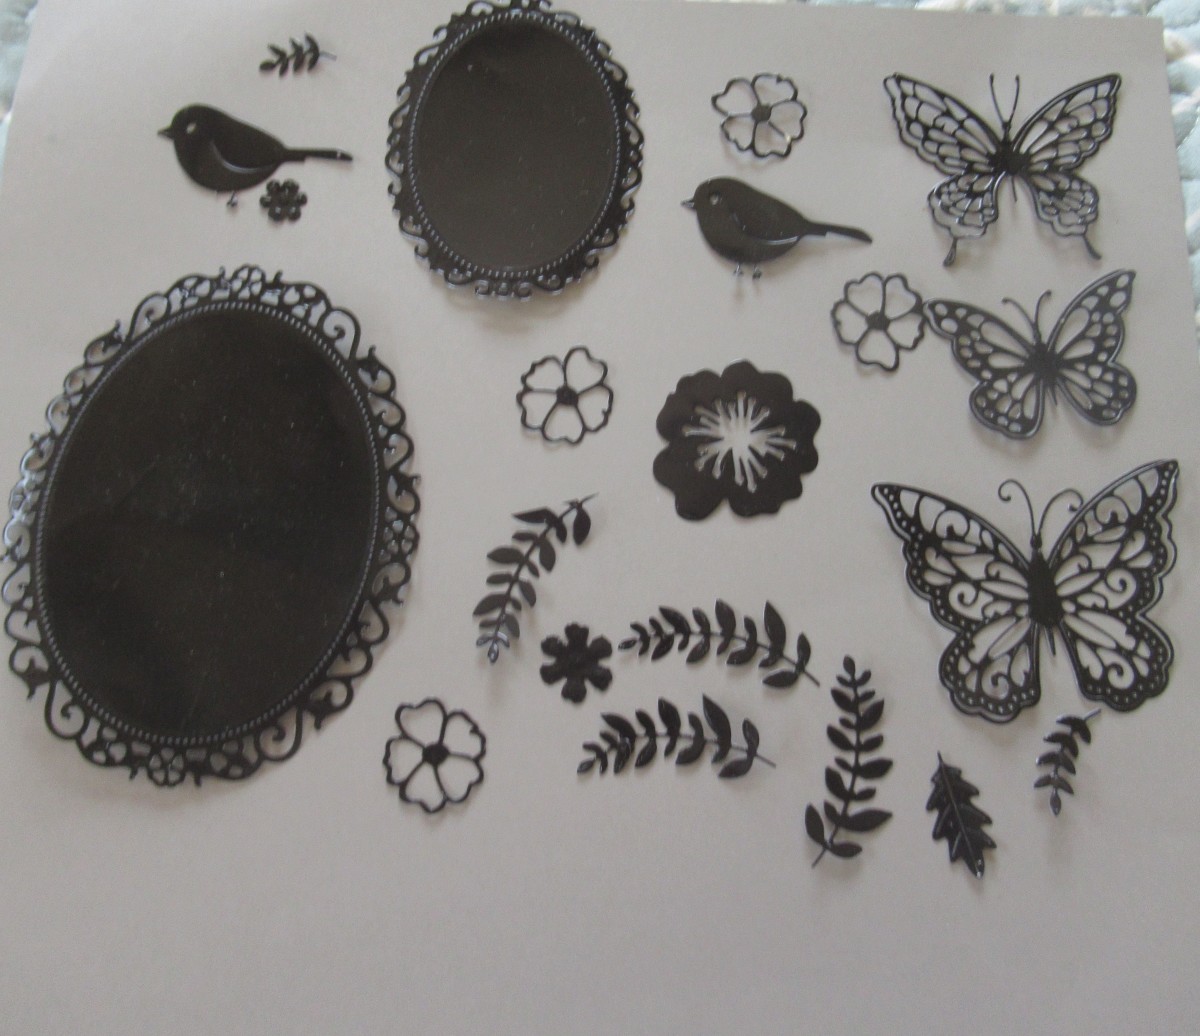 You can get a lot of die cuts from one toner sheet. The number of cuts will depend on the the sizes of die cuts you use.